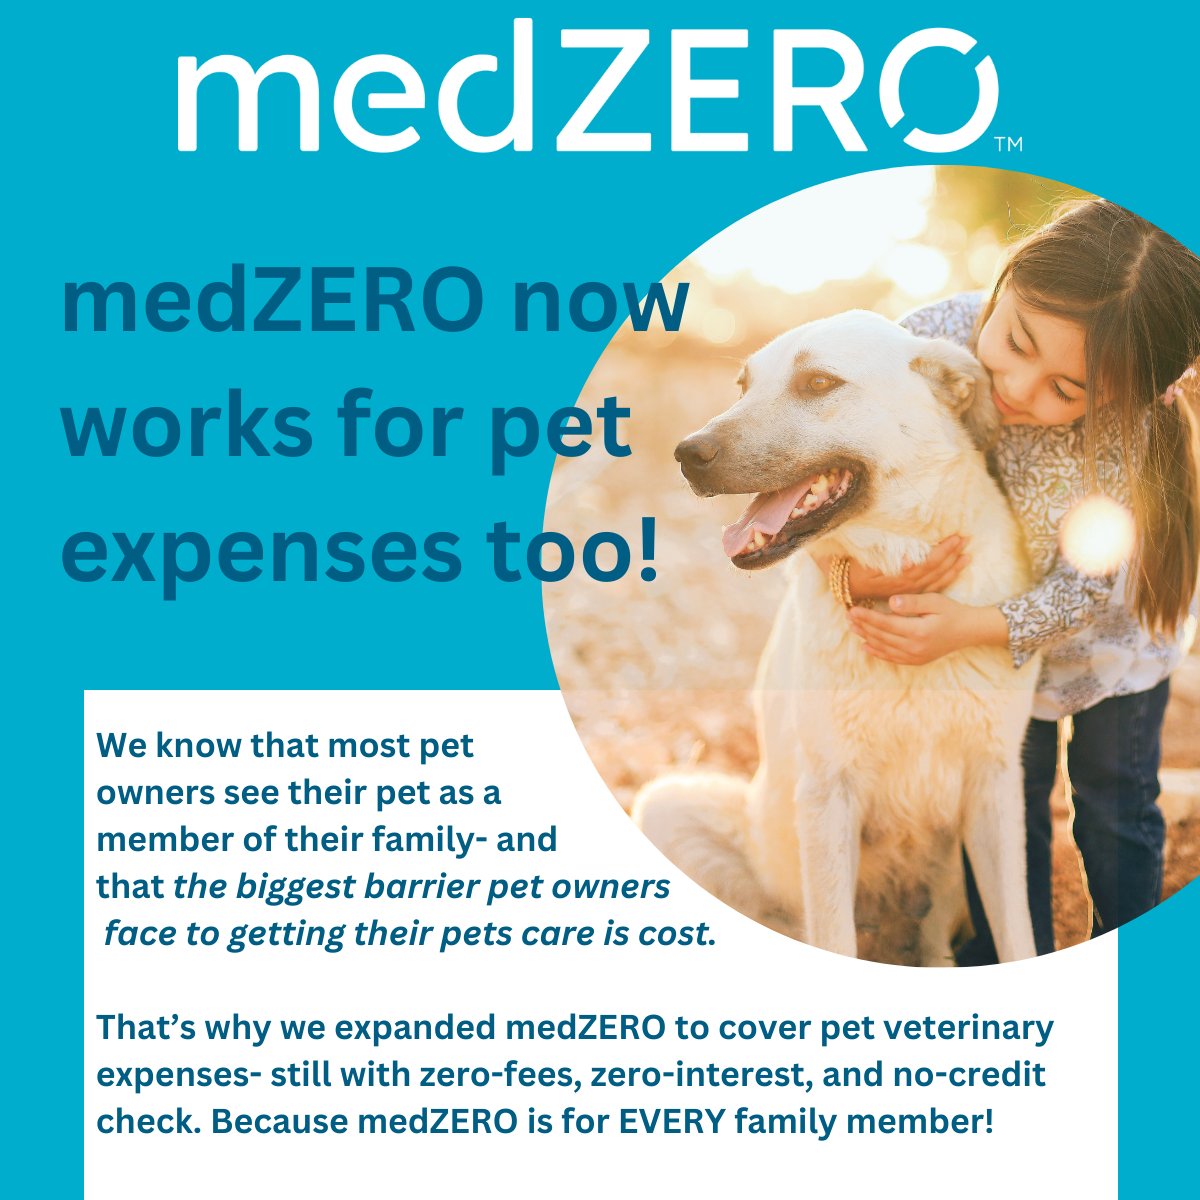 🐾 Exciting news! 🐾 medZERO is breaking down barriers to healthcare for our furry friends! Did you know that nearly 1 in 4 pet owners struggle to afford preventative care for their pets? It's time to prioritize their health and well-being. #medZERO #PetCare #EmployeeBenefits